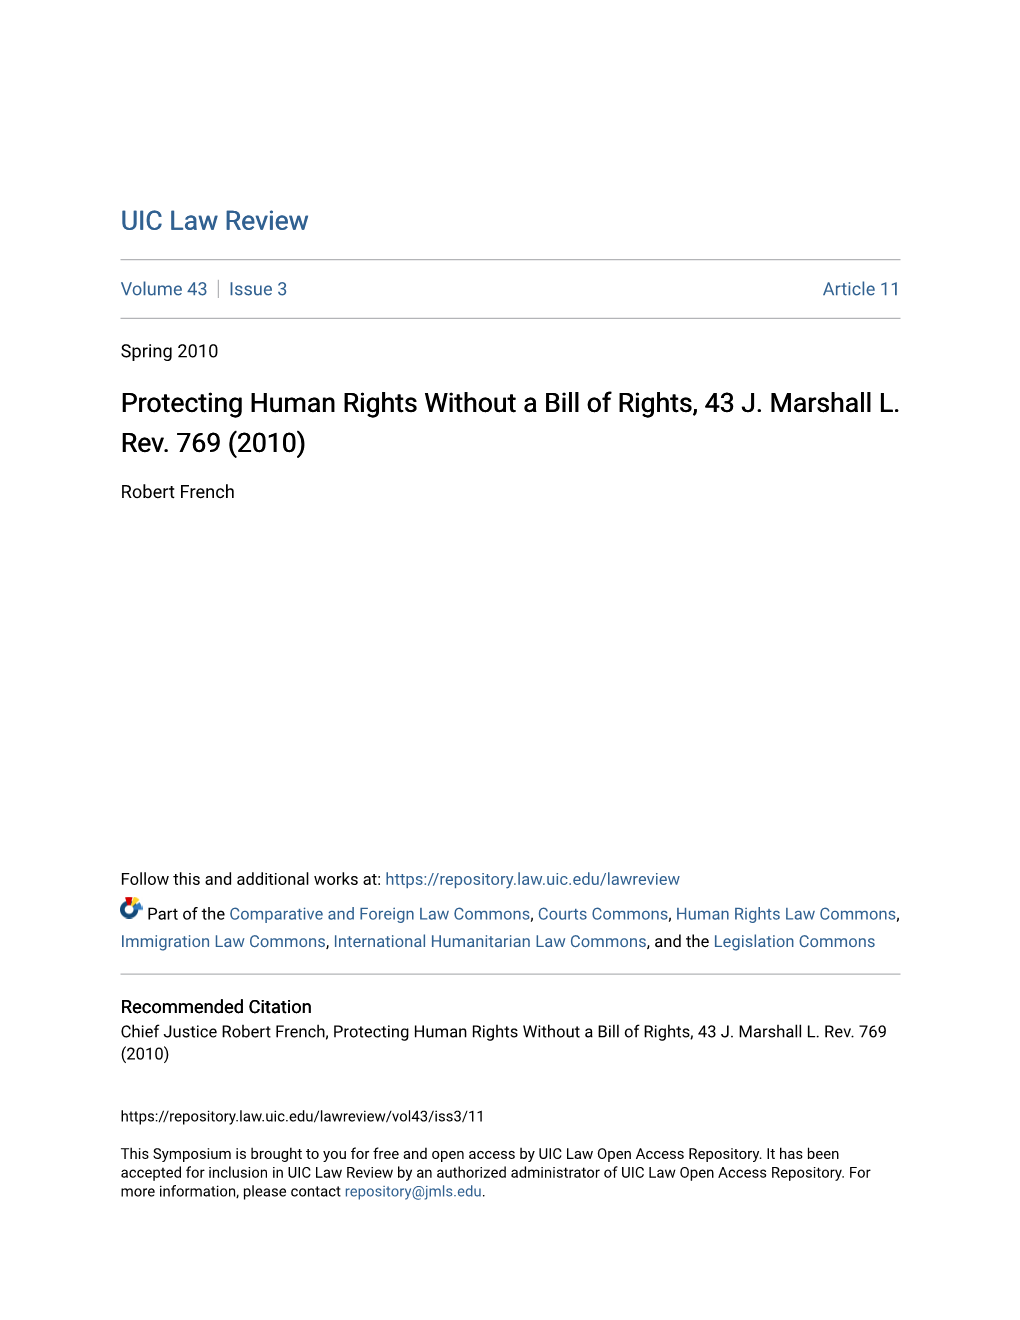 Protecting Human Rights Without a Bill of Rights, 43 J. Marshall L. Rev